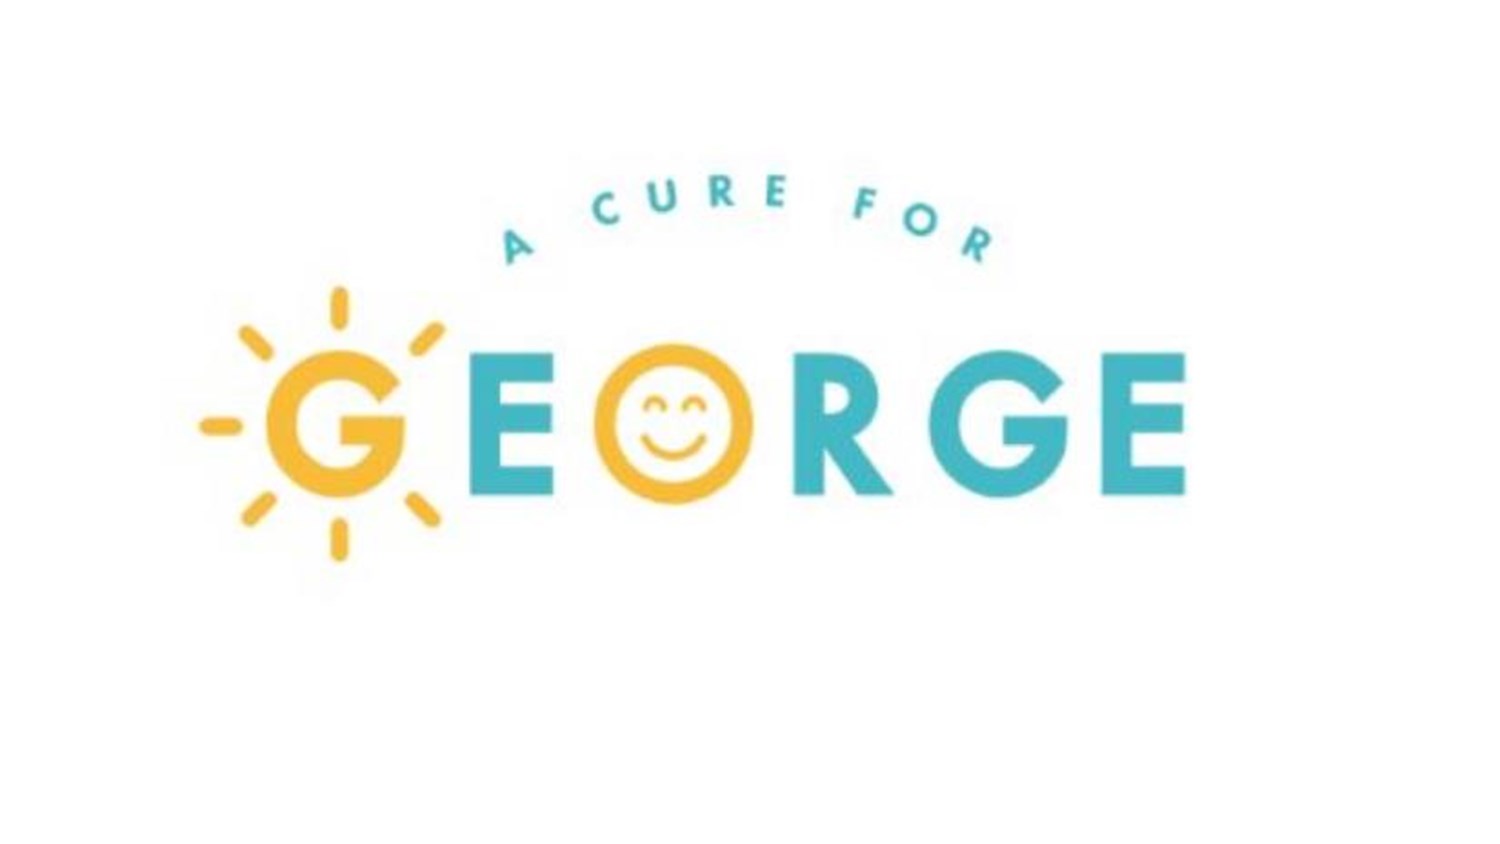 A Cure for George logo 